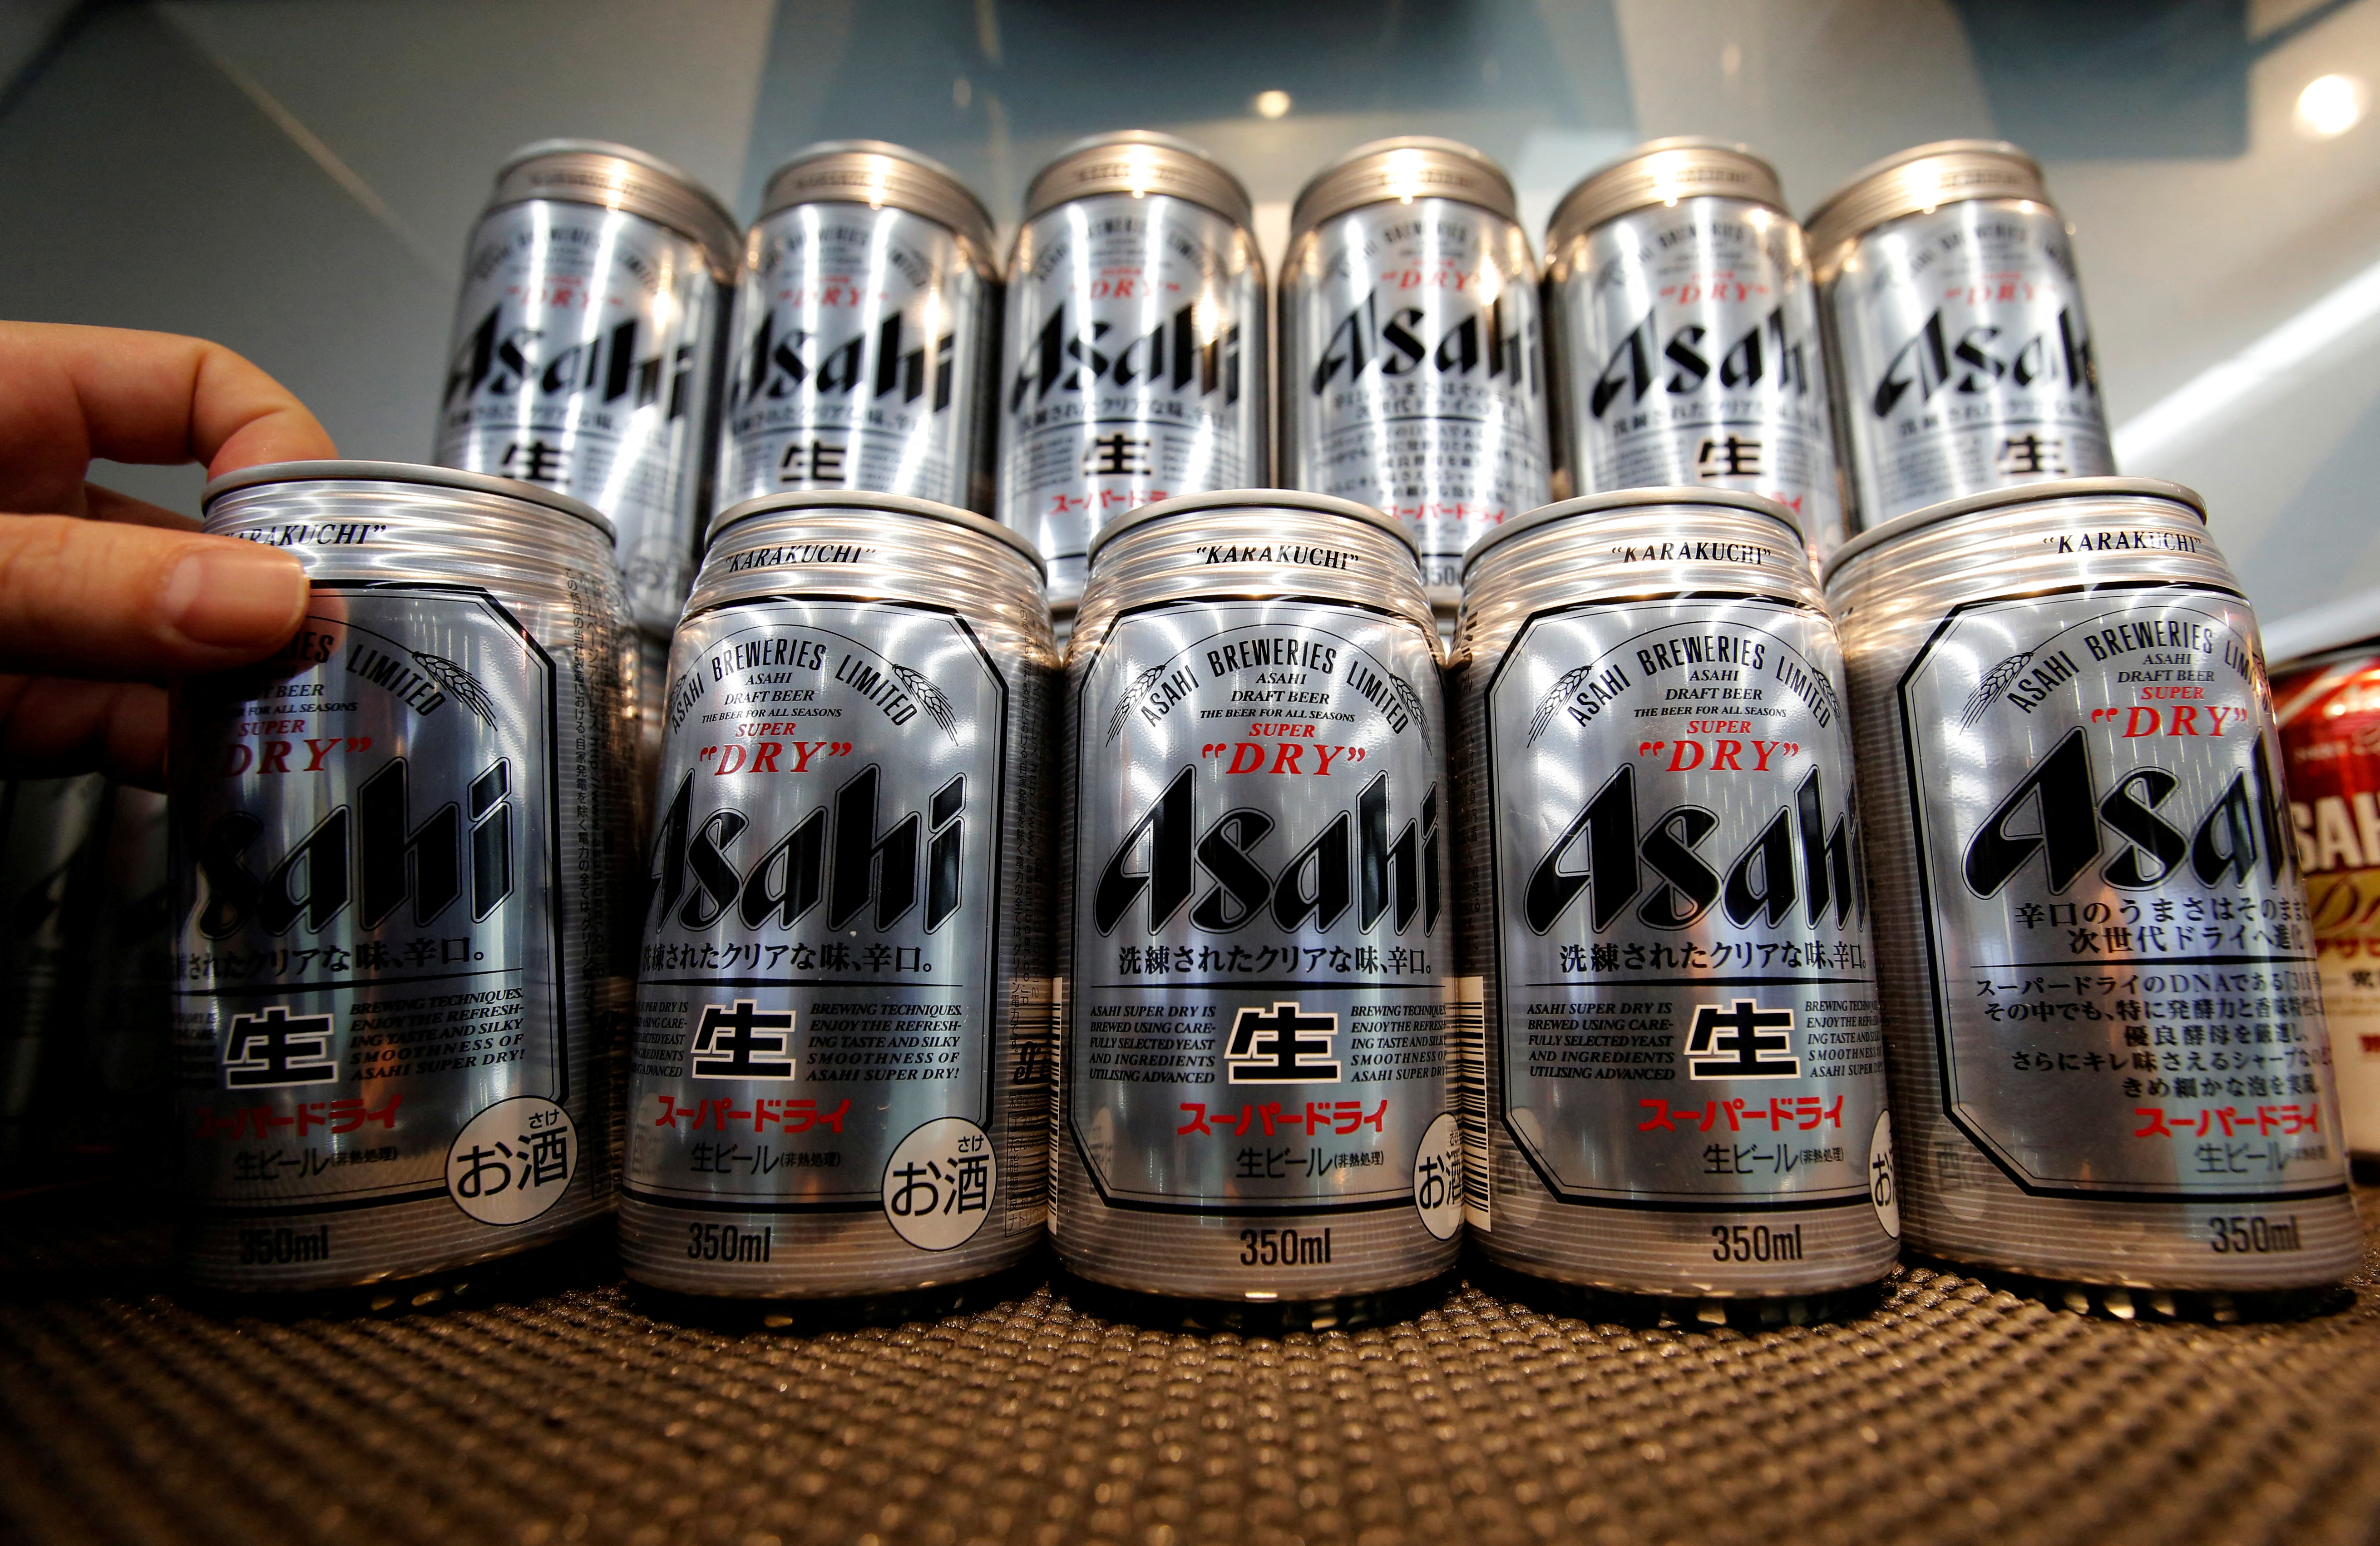 Asahi Super Dry beer cans are displayed at the Asahi Group Holdings headquarters in Tokyo